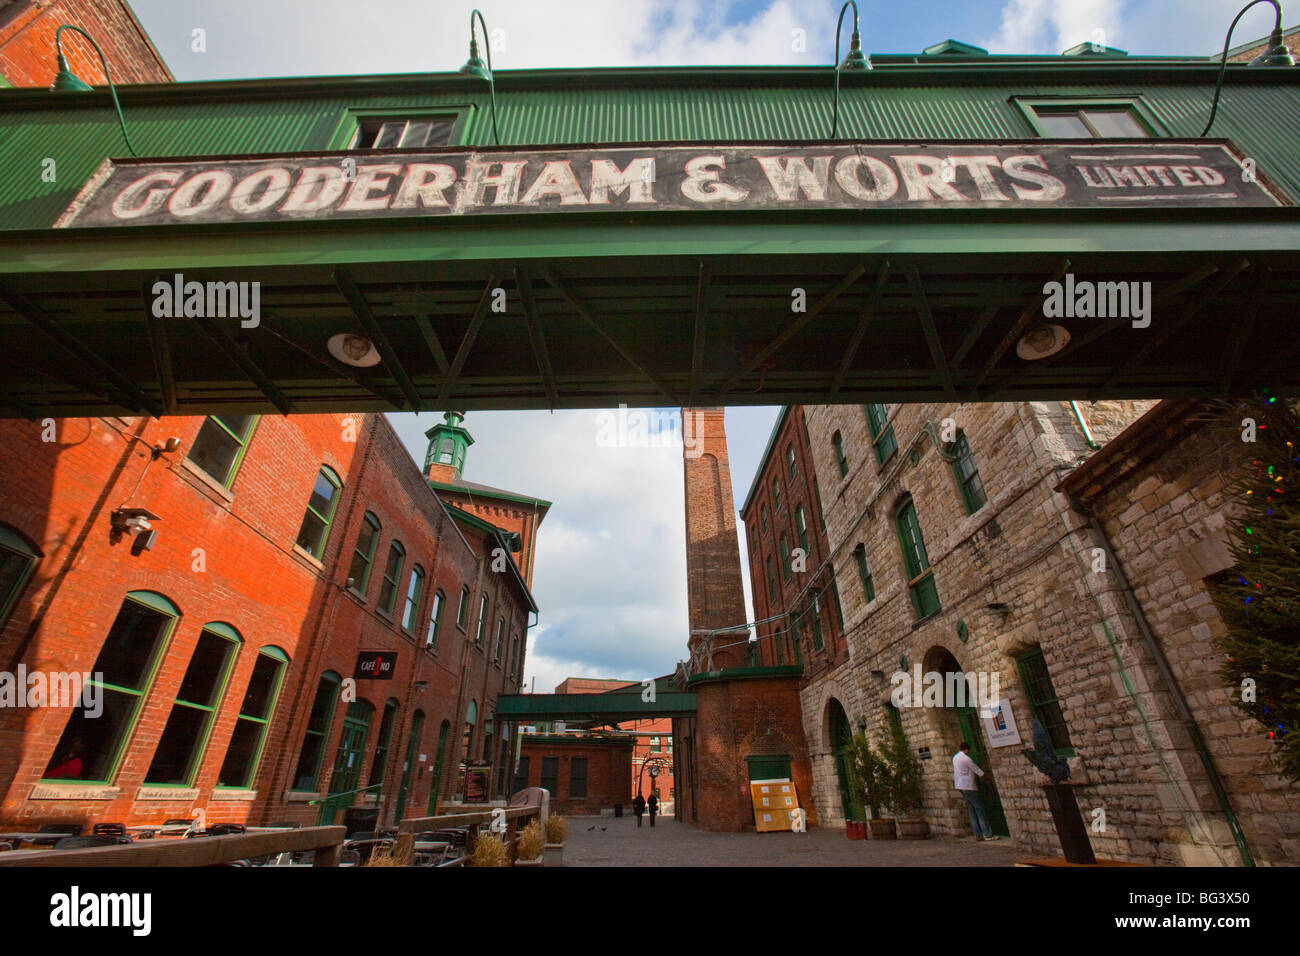 Gooderham and Worts Distillery District in Toronto Canada Stock Photo